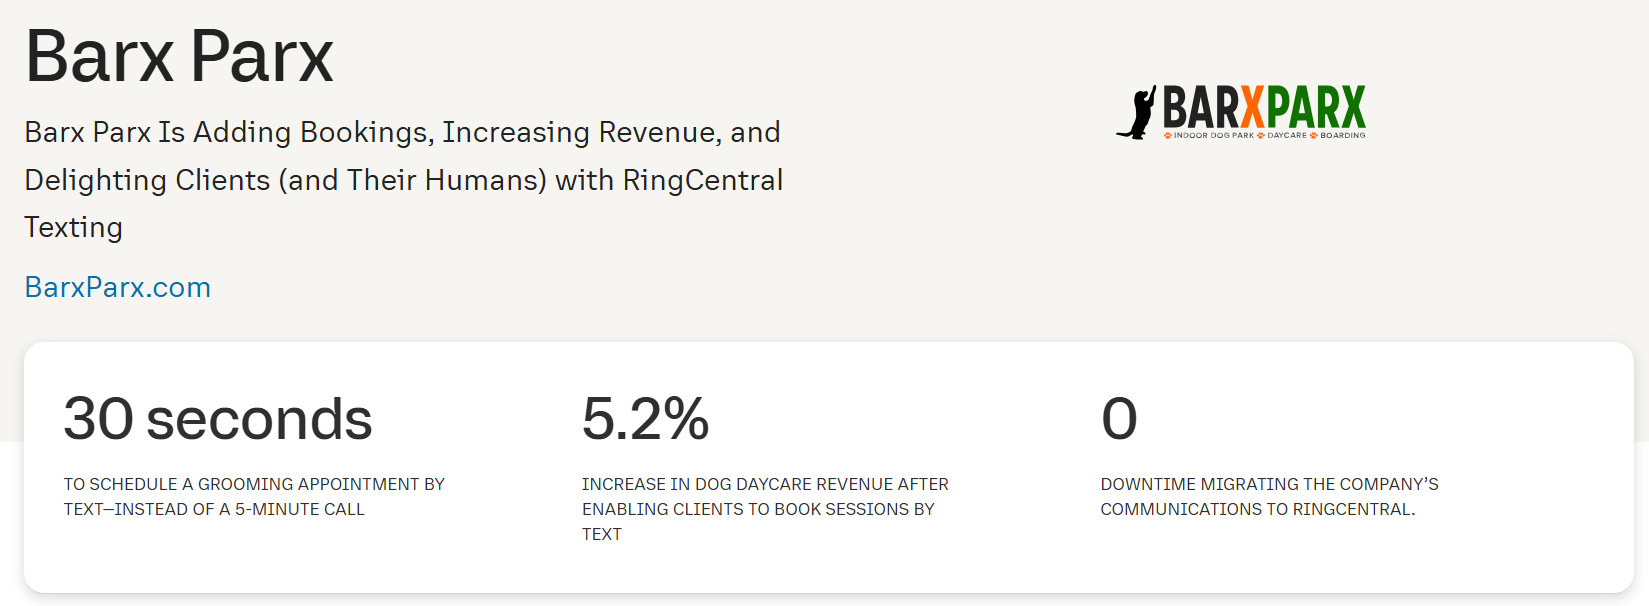 Screenshot from a RingCentral and Barx Park case study, showing both productivity improvements and sales results